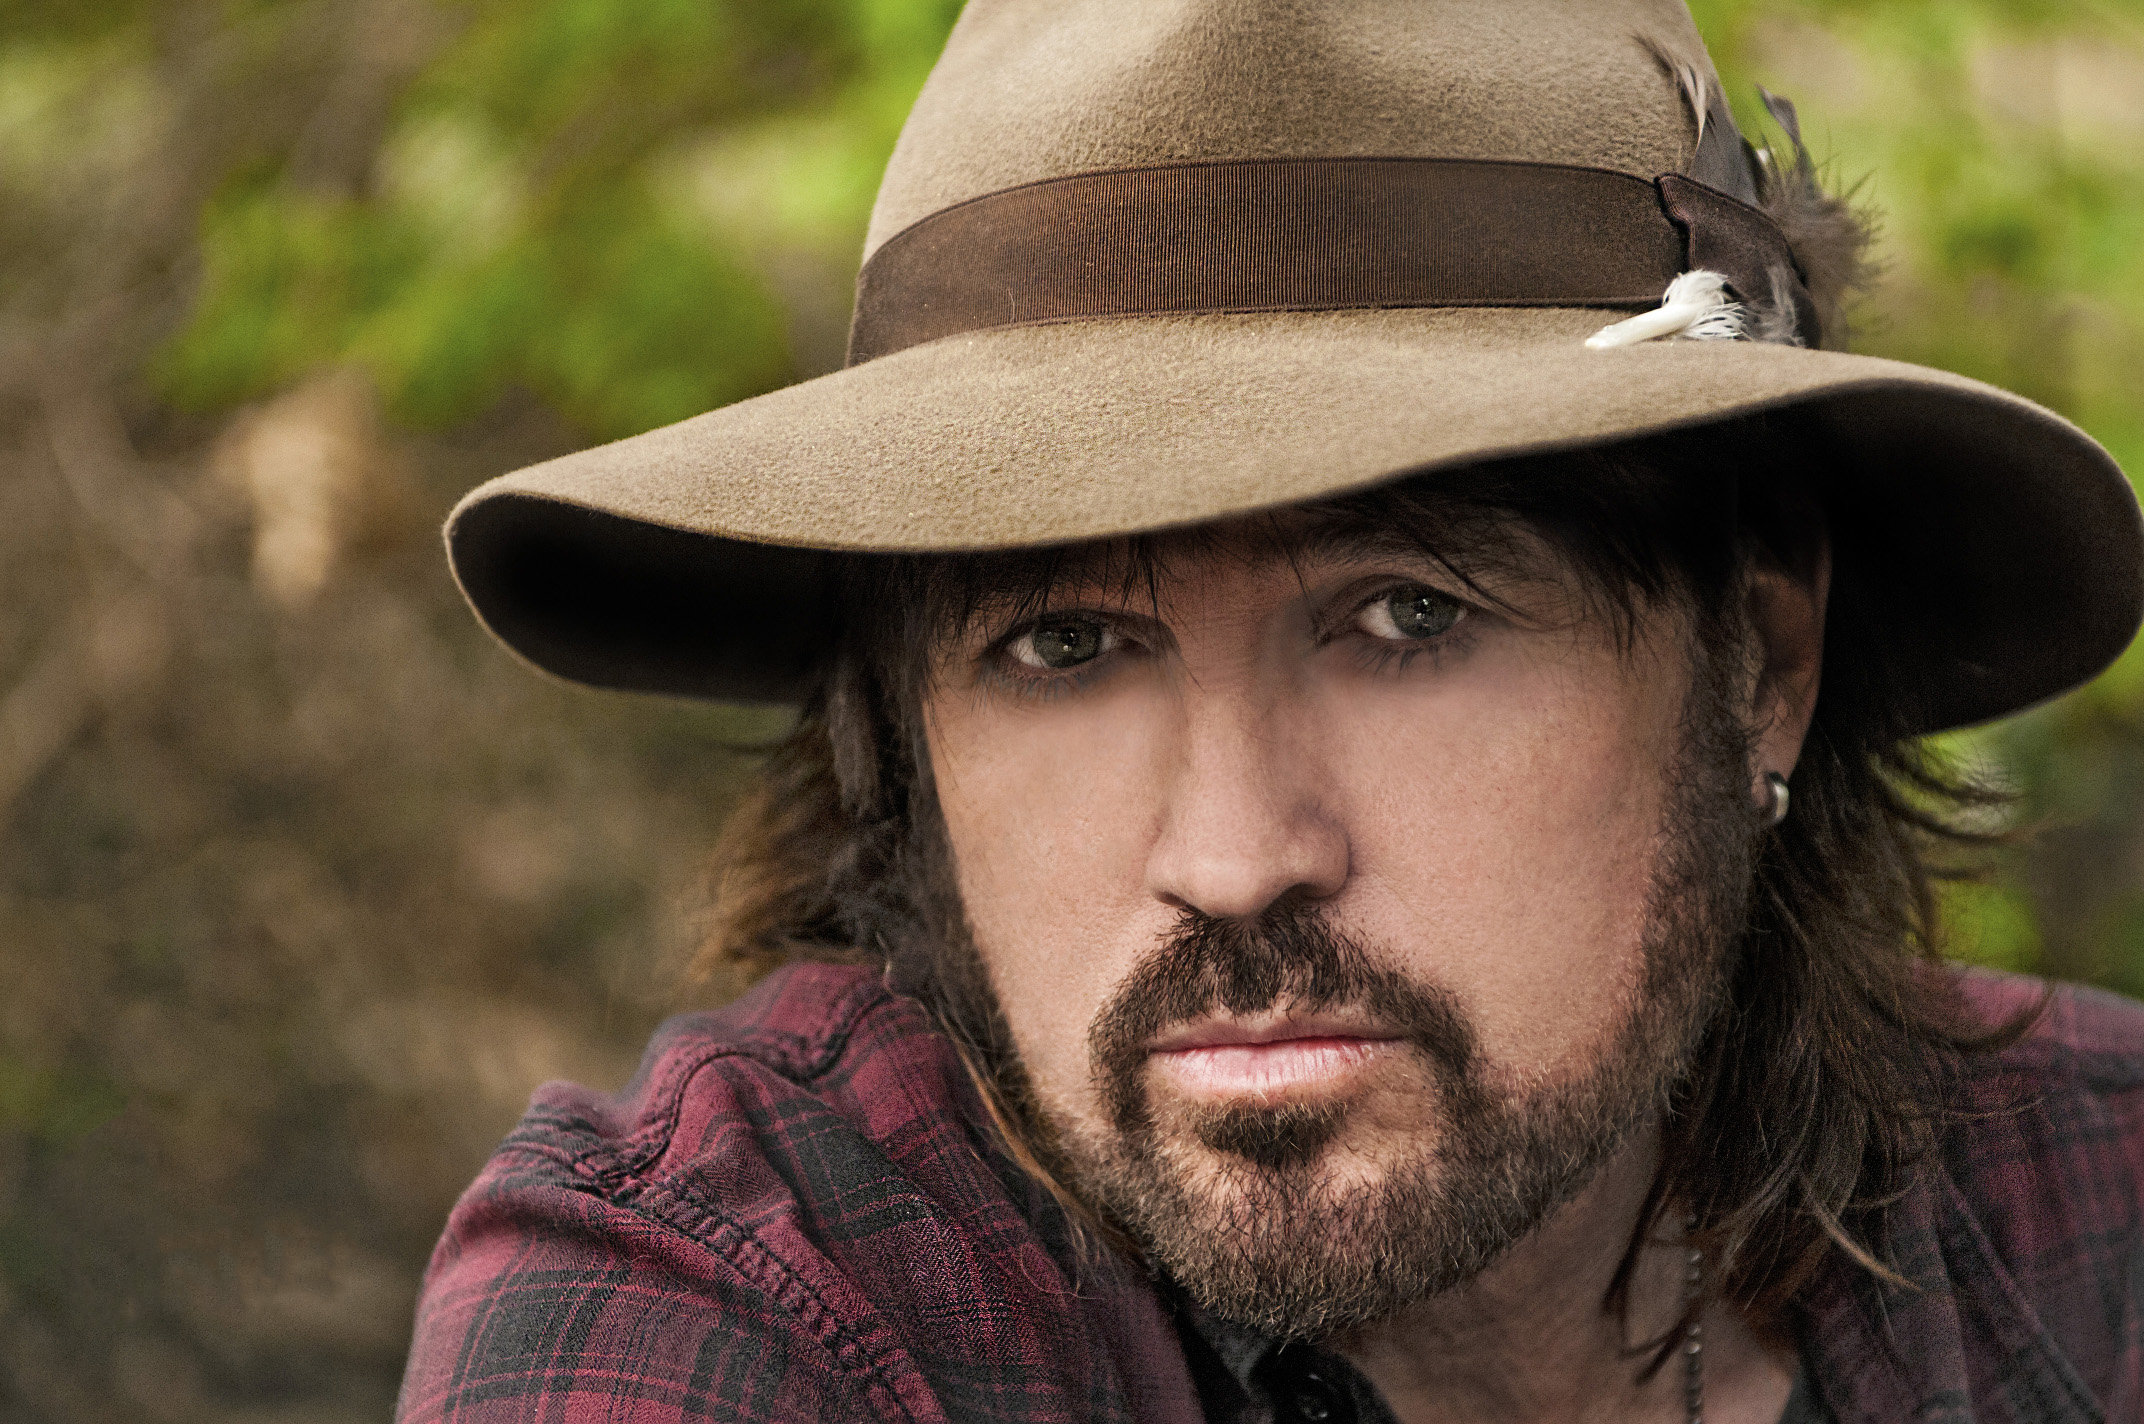 LISTEN: Billy Ray Cyrus Releases Spanish Rendition of “Achy Breaky Heart”